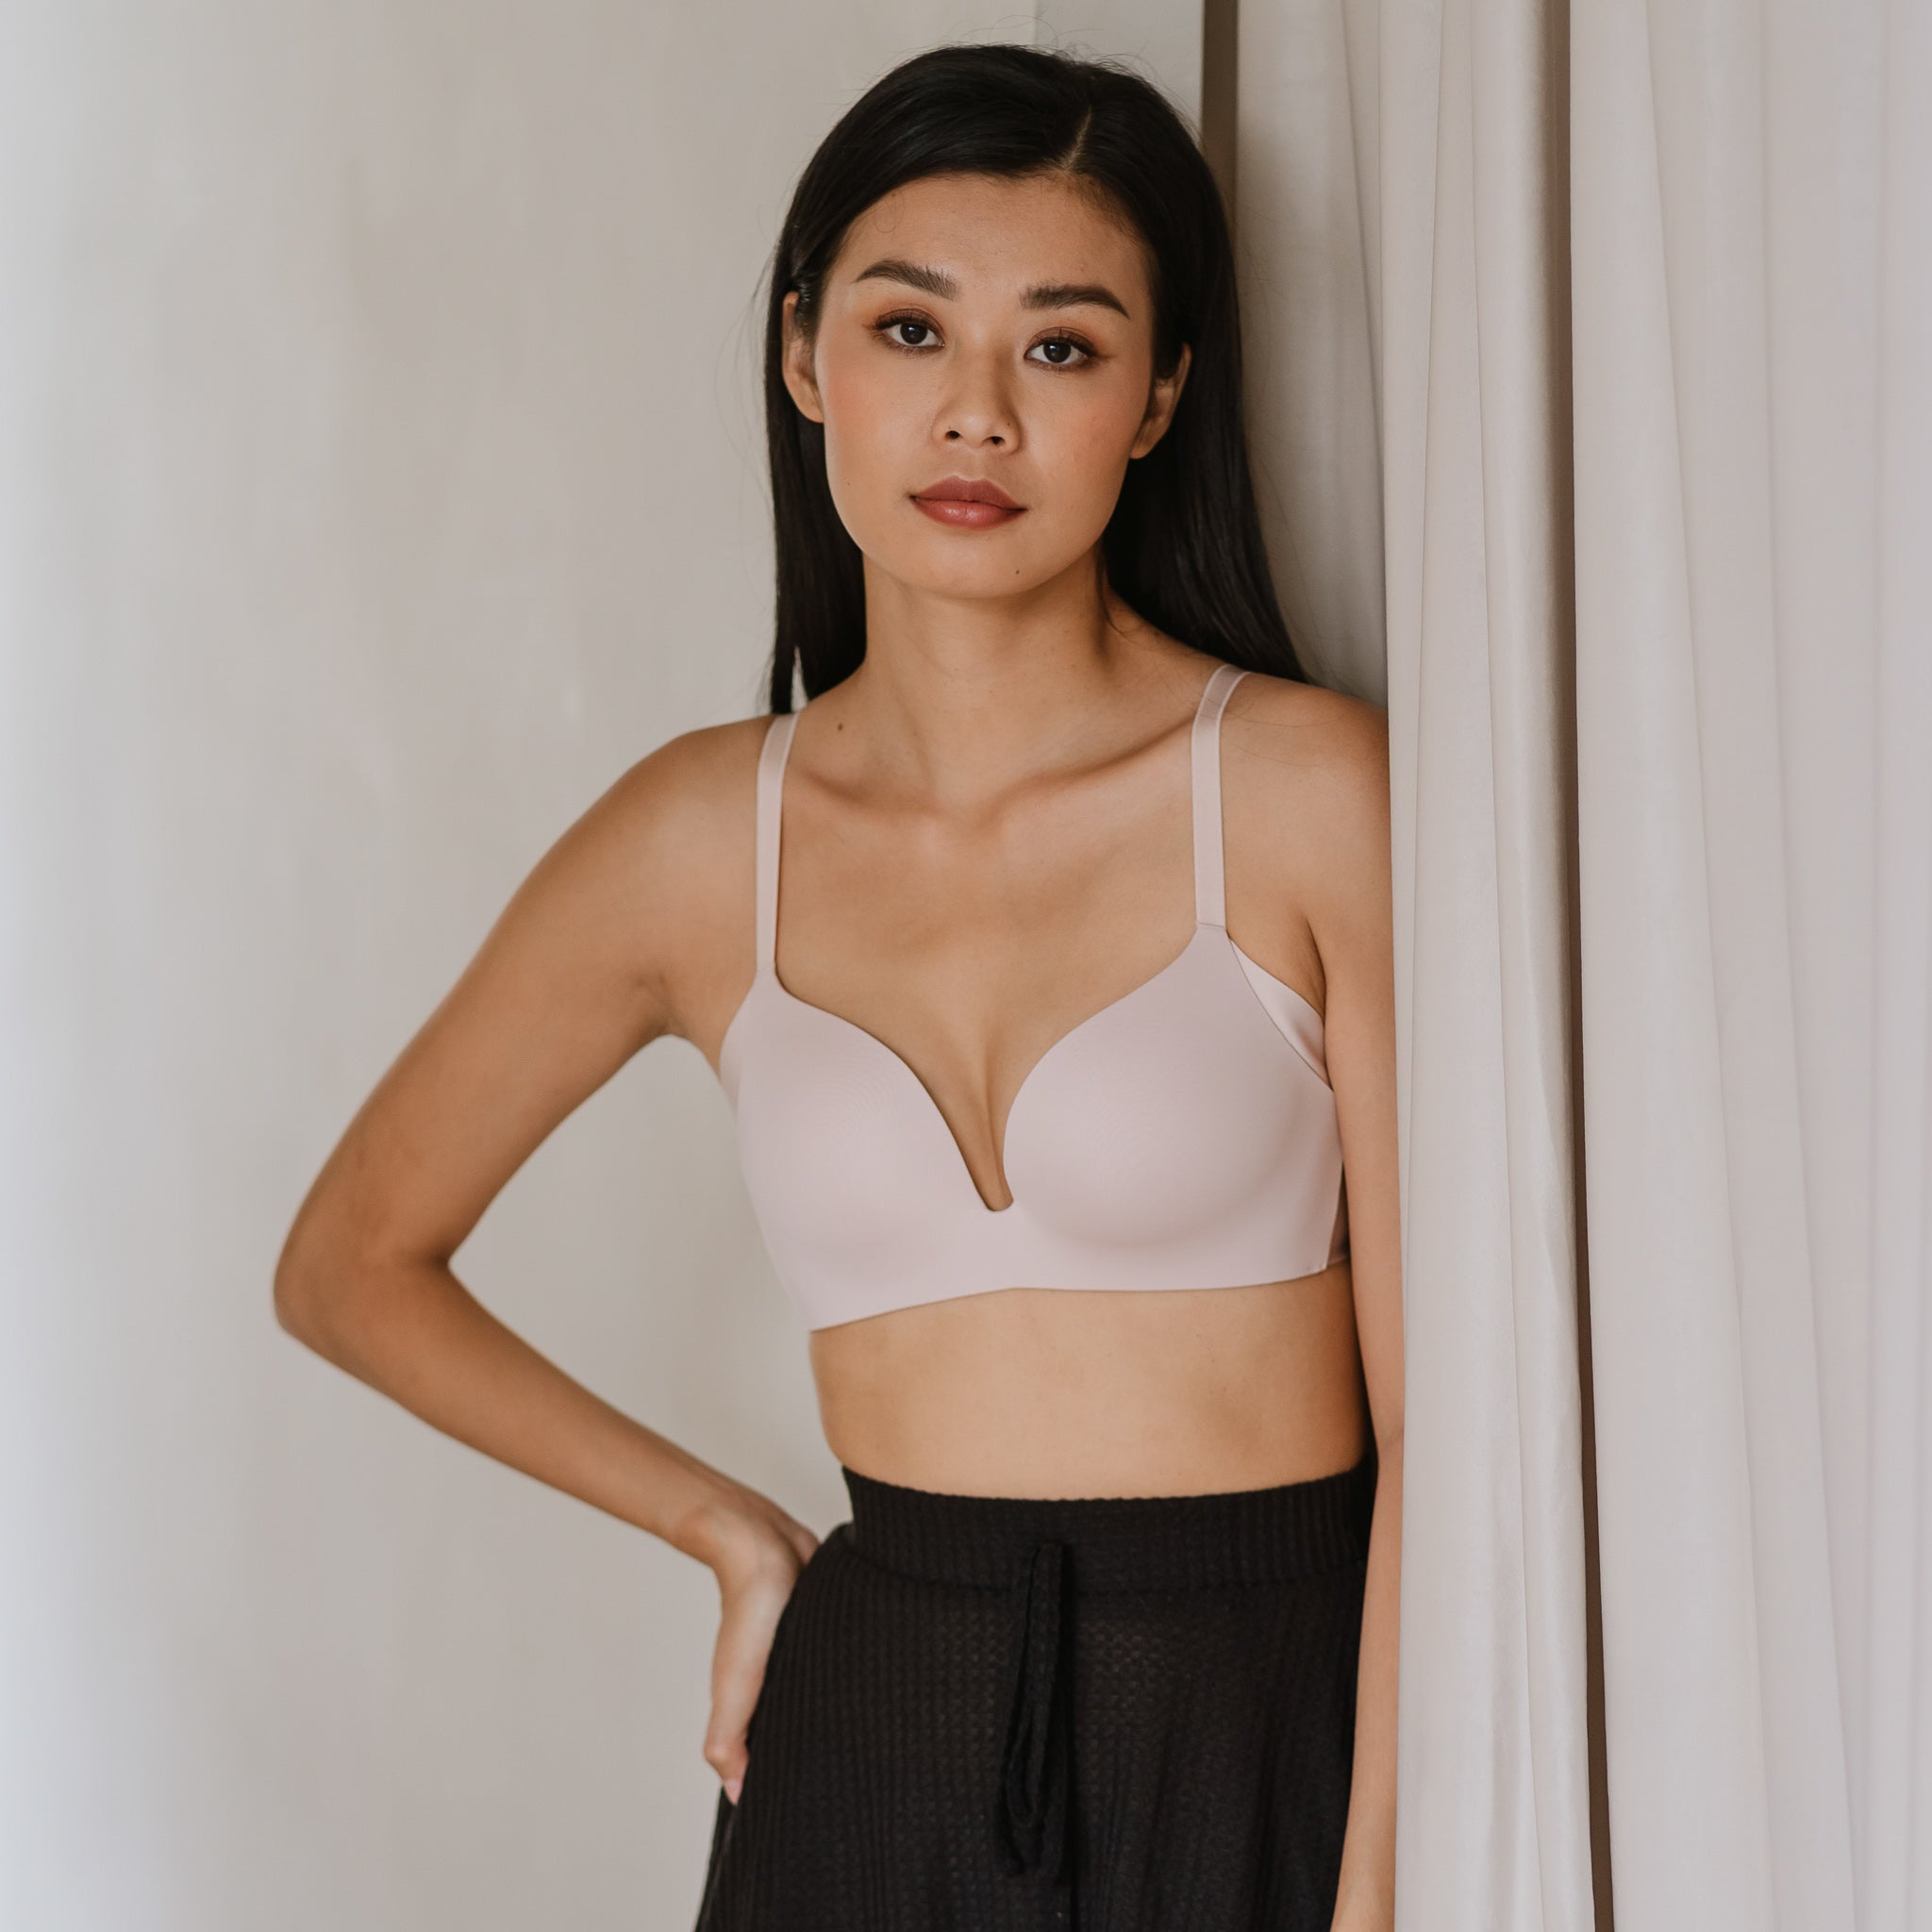 So Obsessed Smooth Push-Up Bra